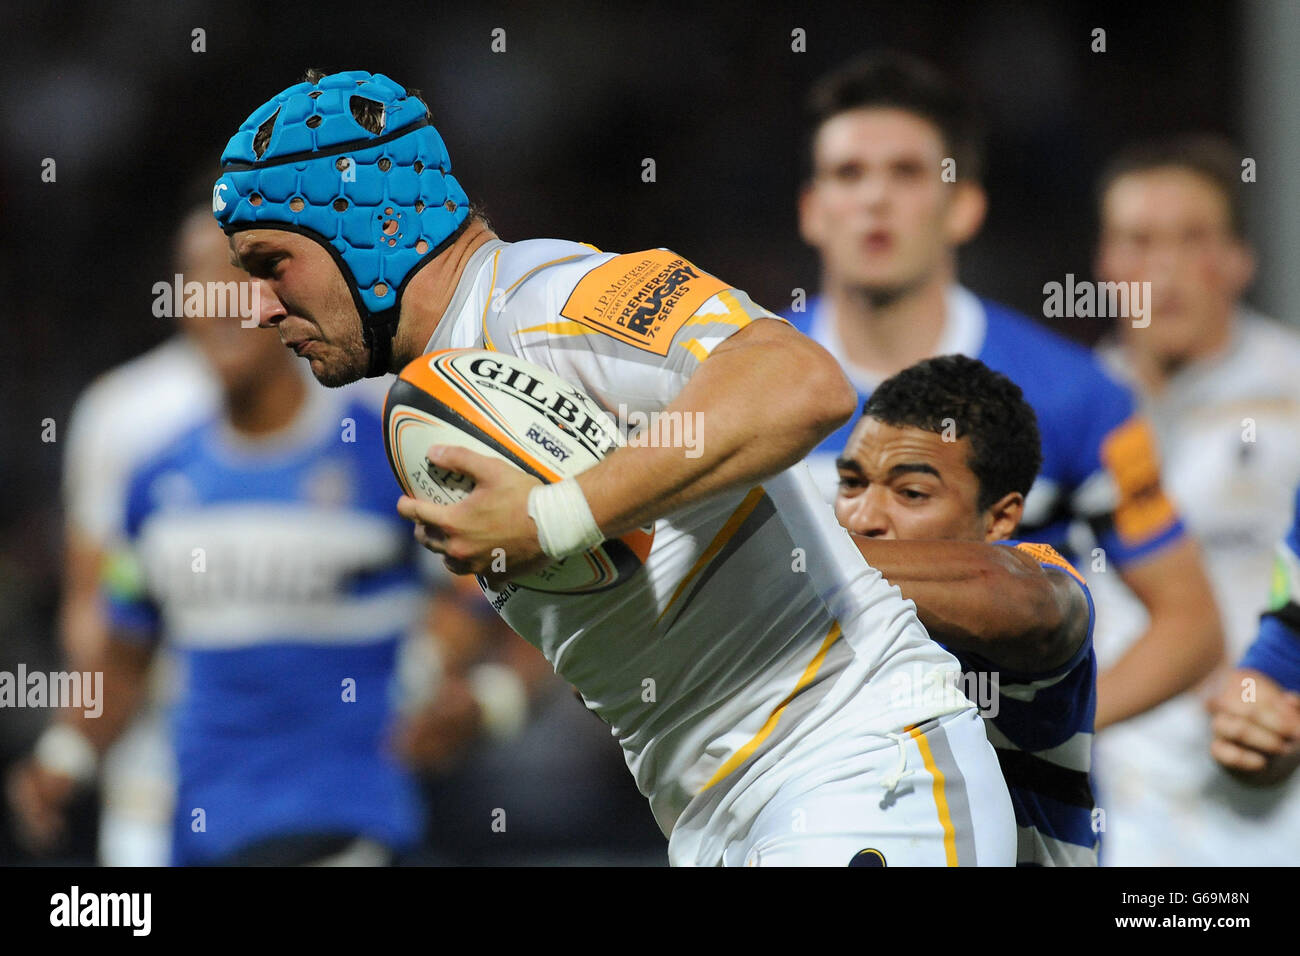 Bath Rugby 7's Raymond Bishop (right) tackles Worcester Warriors 7's Richard De Carpentier during the Group A match of the J.P. Morgan Asset Management Premiership Rugby 7's at Kingsholm Stadium, Gloucester. Stock Photo